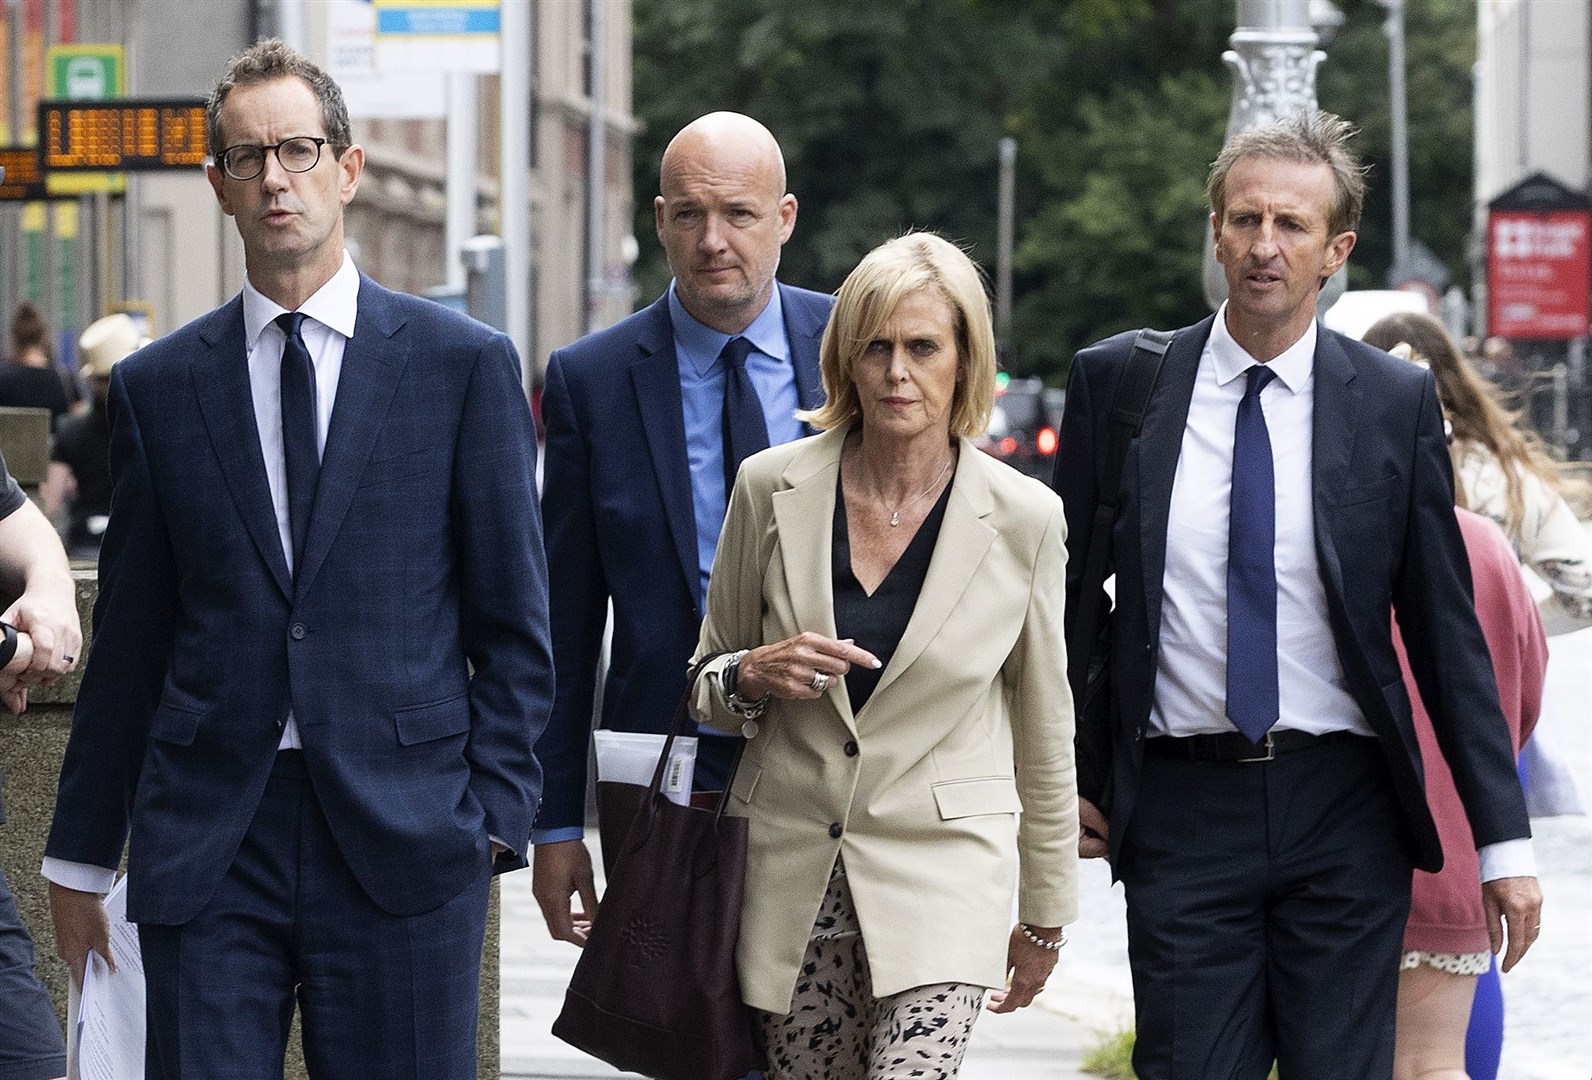 RTE interim deputy director general Adrian Lynch (left), commercial director Geraldine O’Leary (second right), chief financial officer Richard Collins (right) and strategy director Rory Coveney arriving at Leinster House (Brian Lawless/PA)